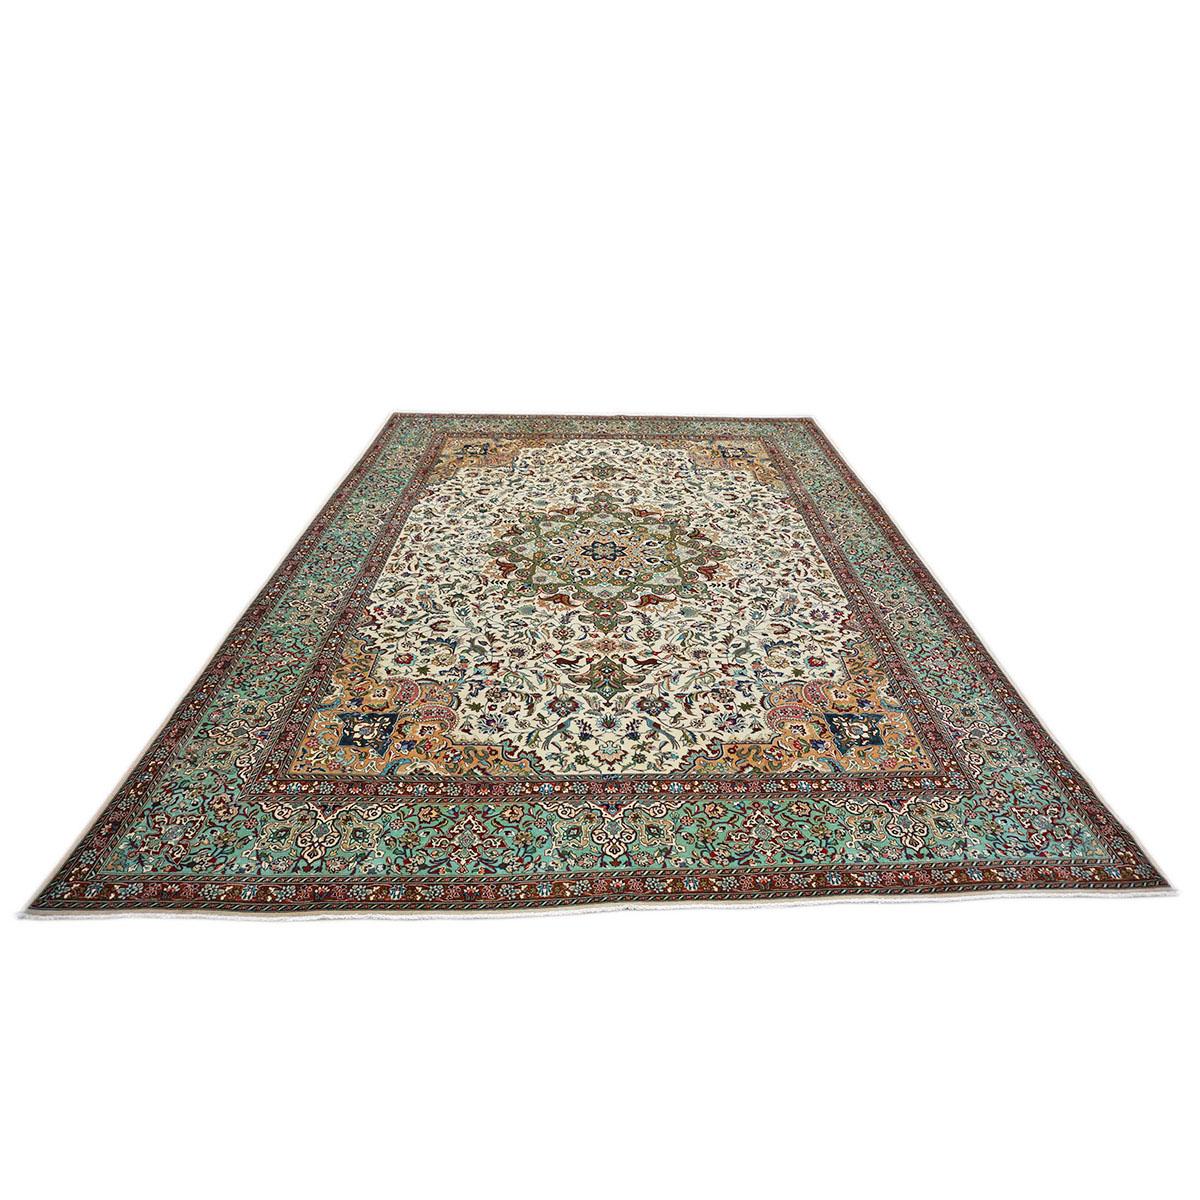 Ashly Fine Rugs presents a Vintage Persian Tabriz 9x13 Ivory, Light Green, and Red Handmade Area Rug. An Ivory field populated with fine detailed medallion floral designs.
Accent colors include light green, taupe, sage green, and light blue.
The rug